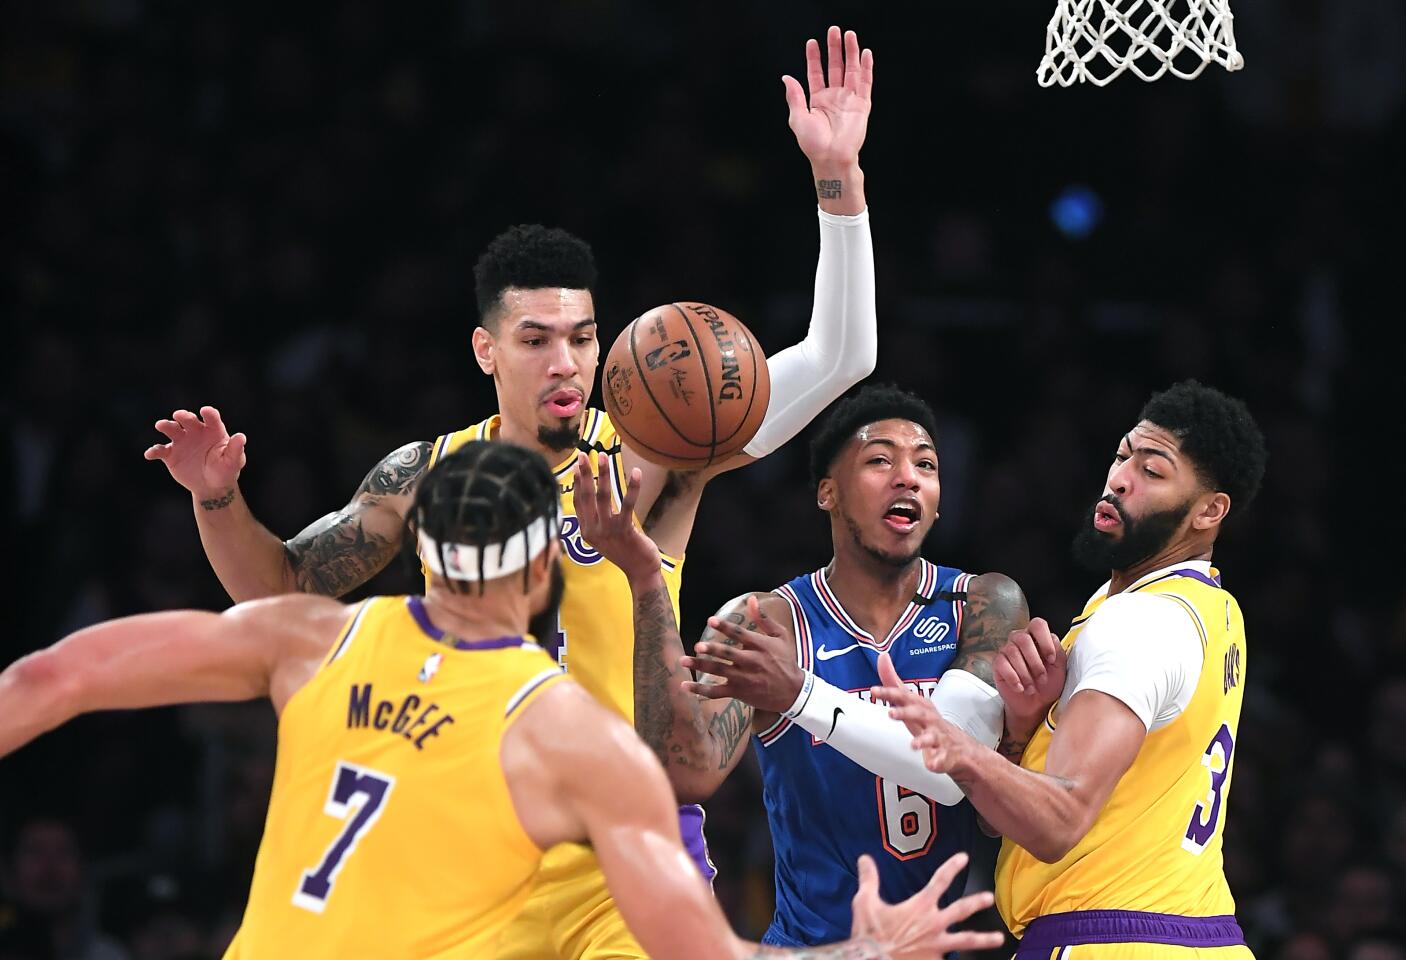 Knicks guard Elfrid Payton loses the ball in front of Lakers Javale McGee, Danny Green and Anthony Davis during the first quarter of a game Jan. 7 at Staples Center.